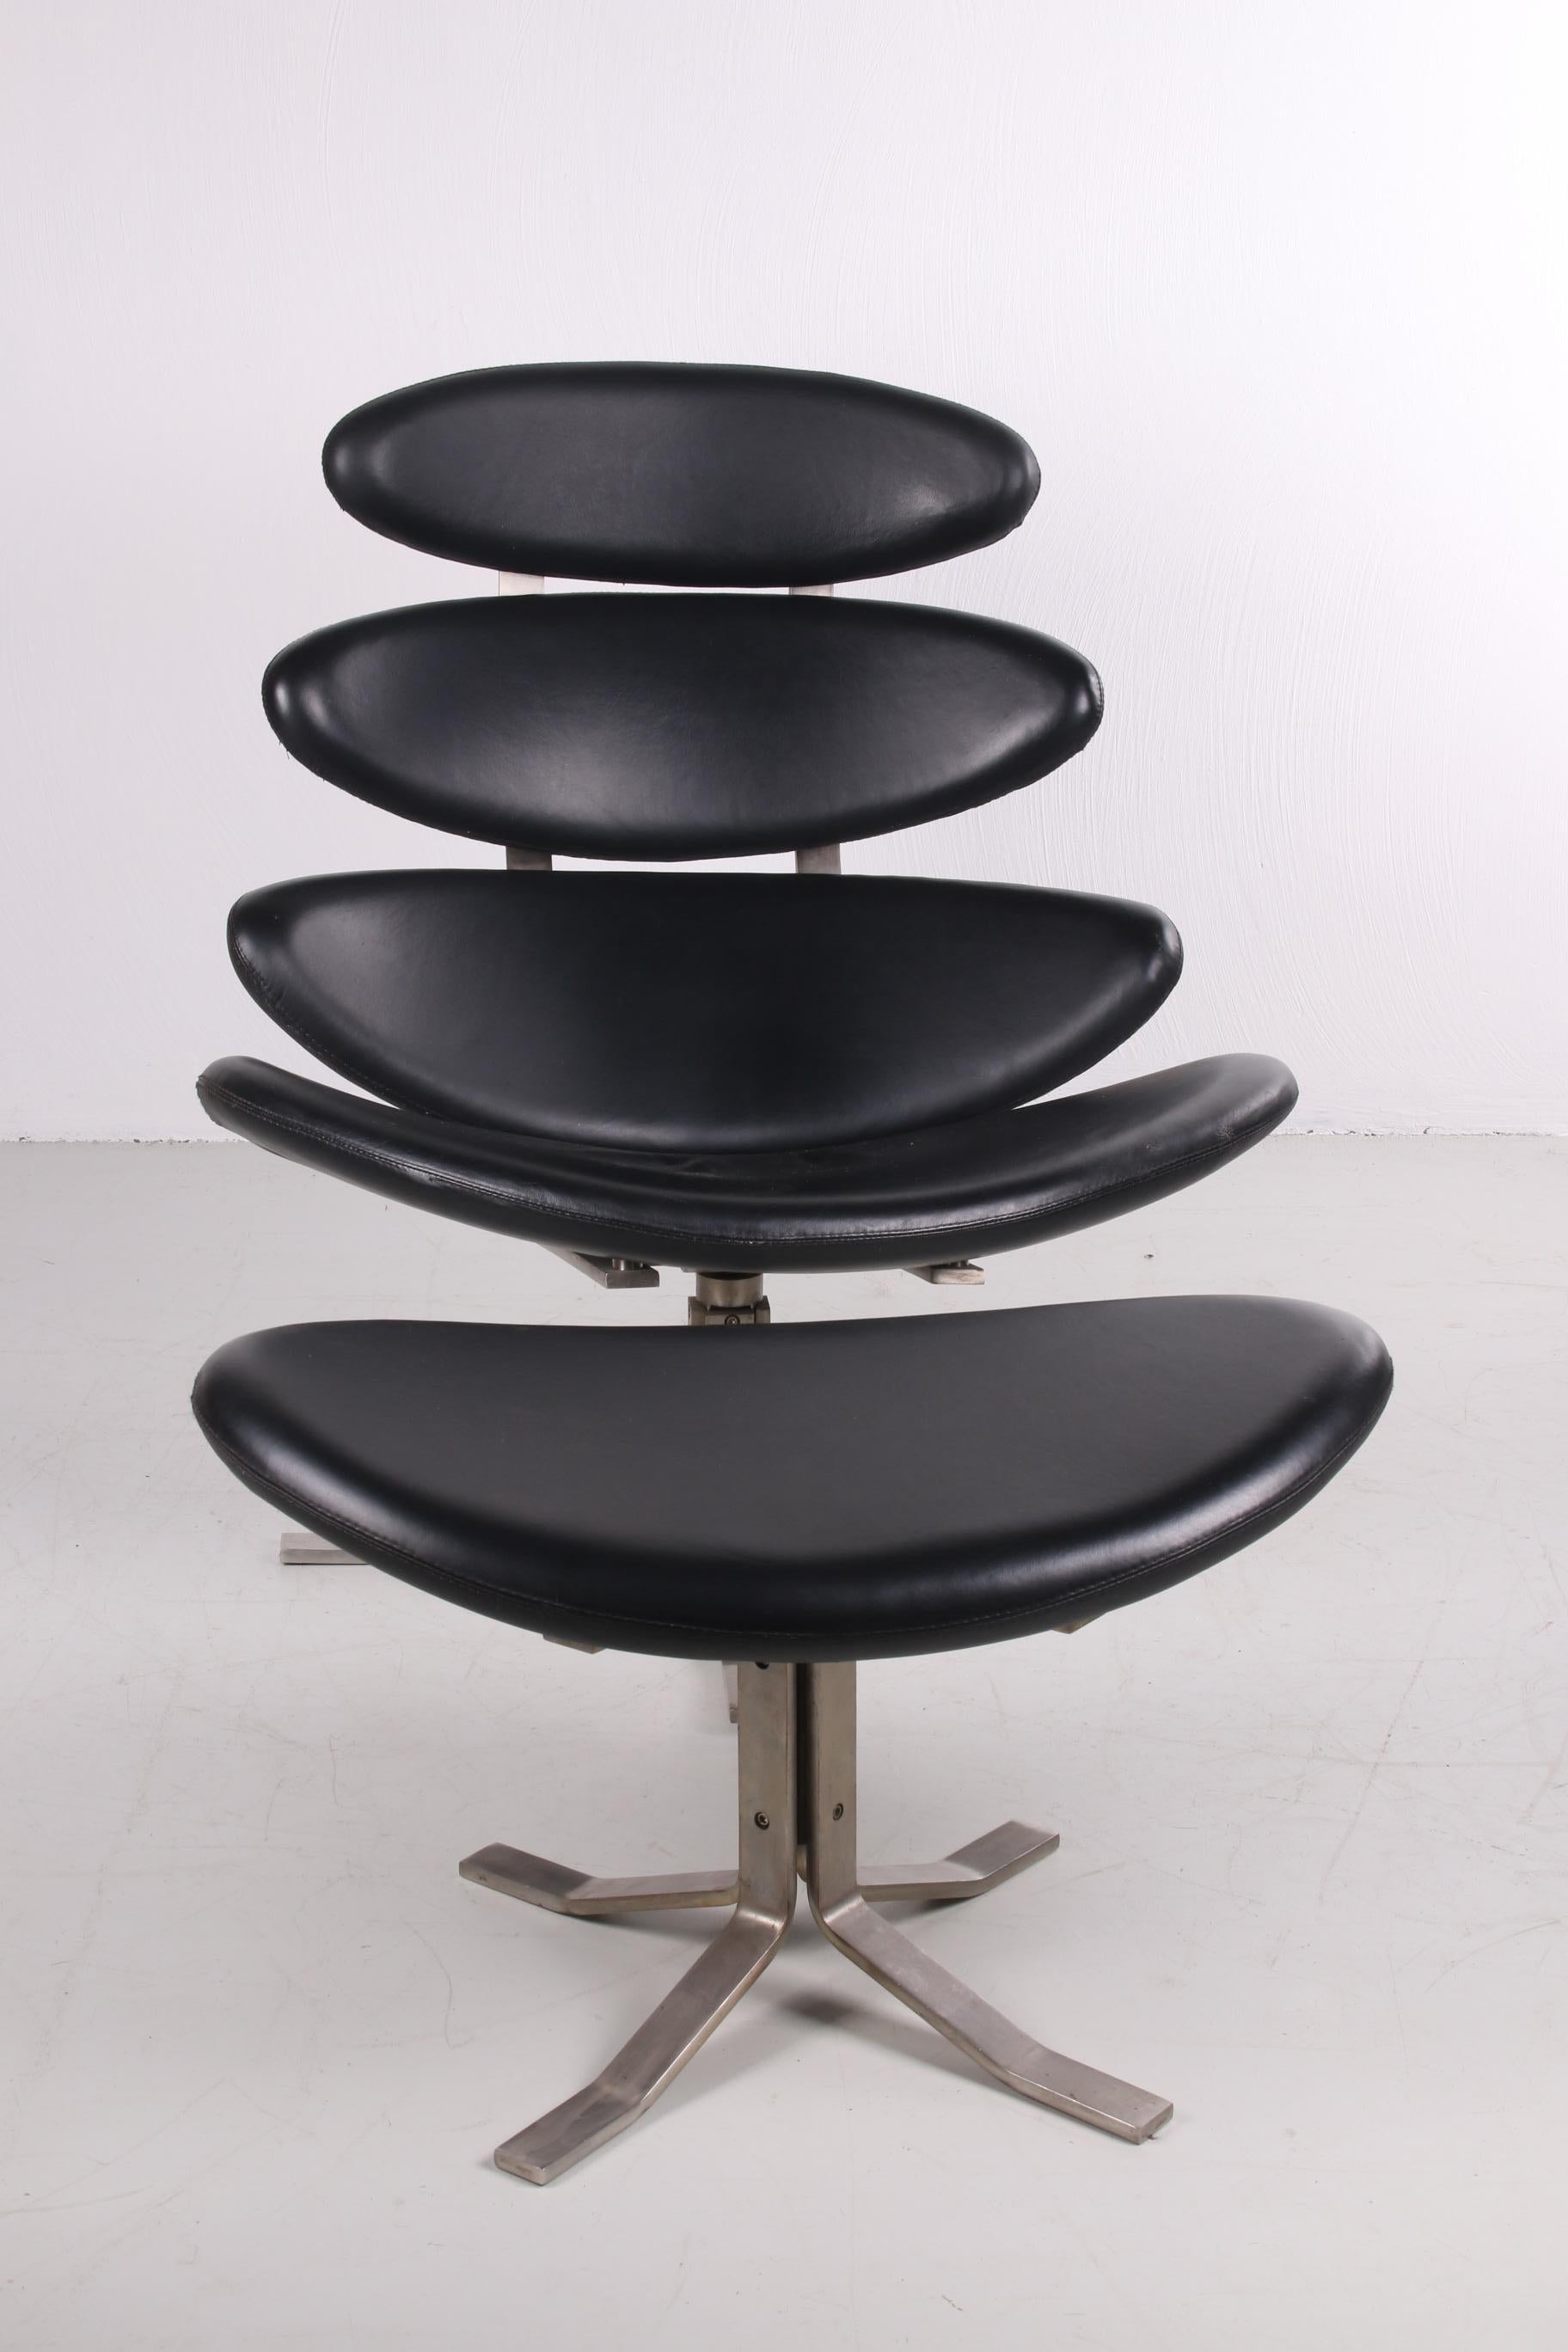 Danish Corona Chair with Hocker Design from Poul Volther for Erik Jorgensen